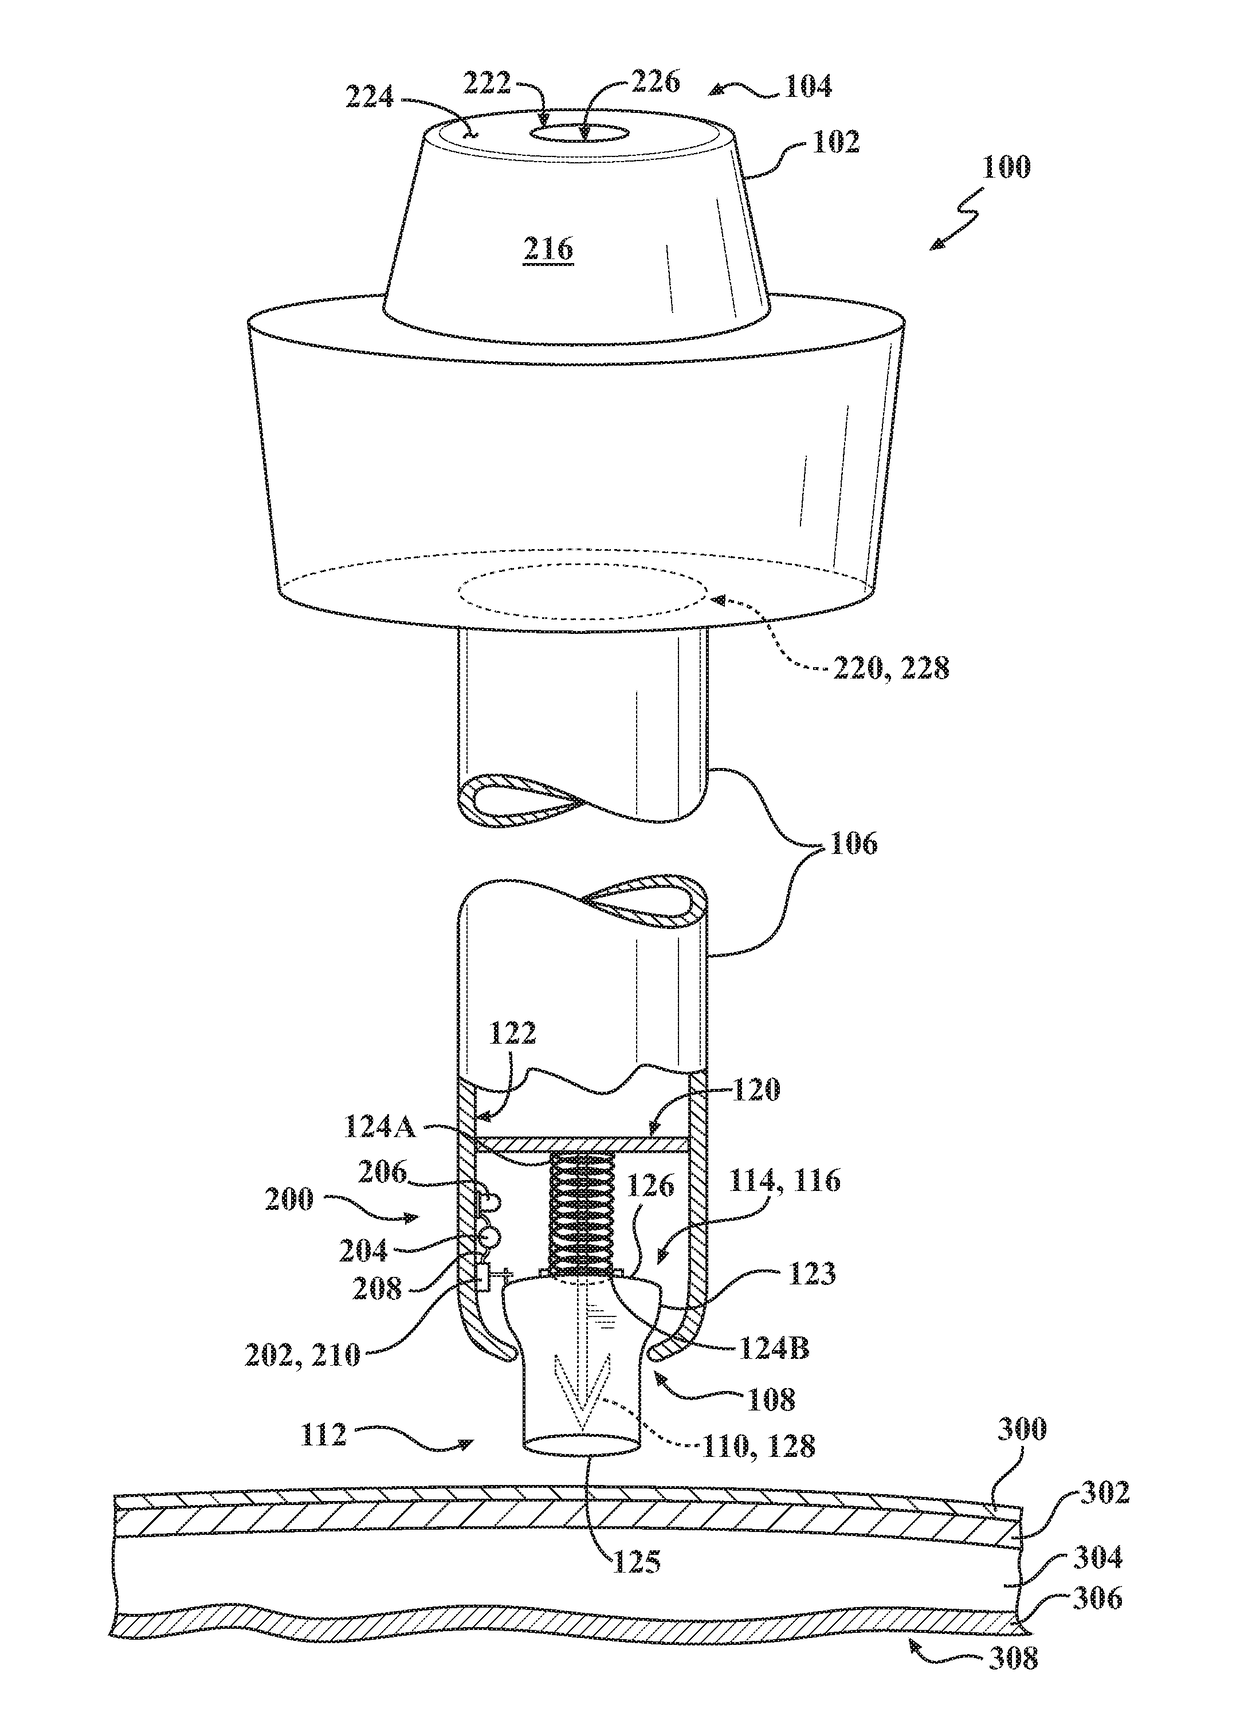 Trocar Assemblies With Movable Atraumatic Tip And Methods For Use